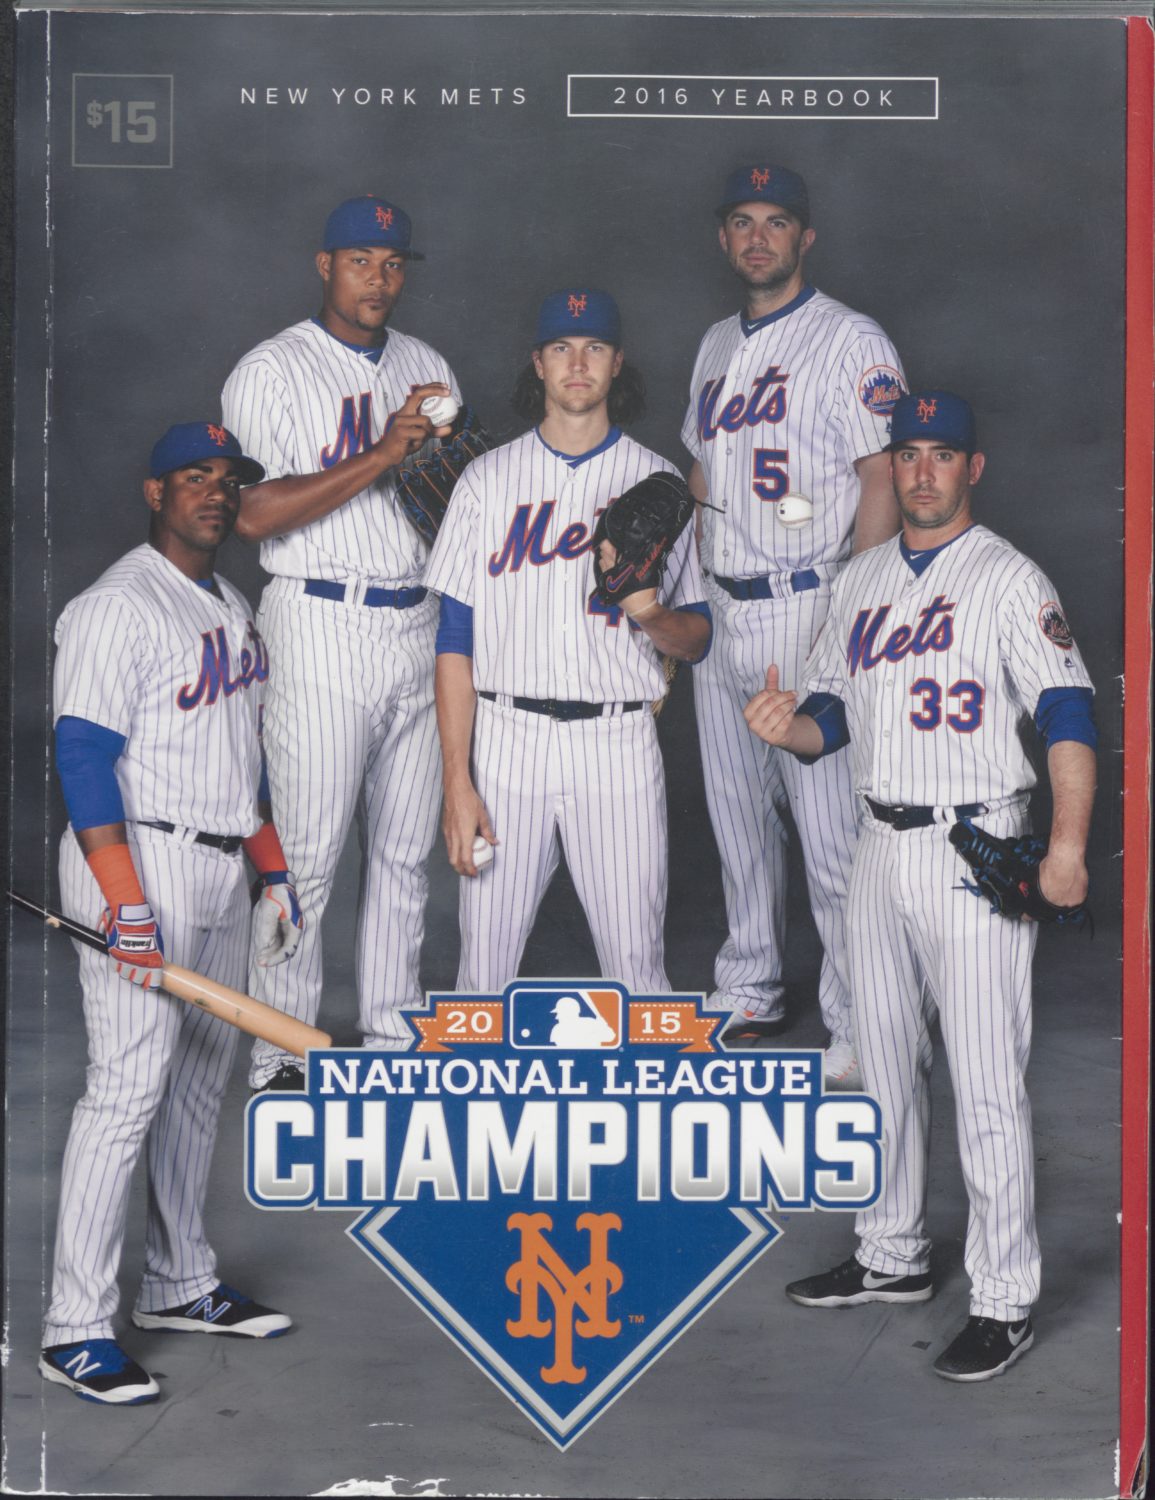 2016 Mets Yearbook: Celebrating the NL Pennant